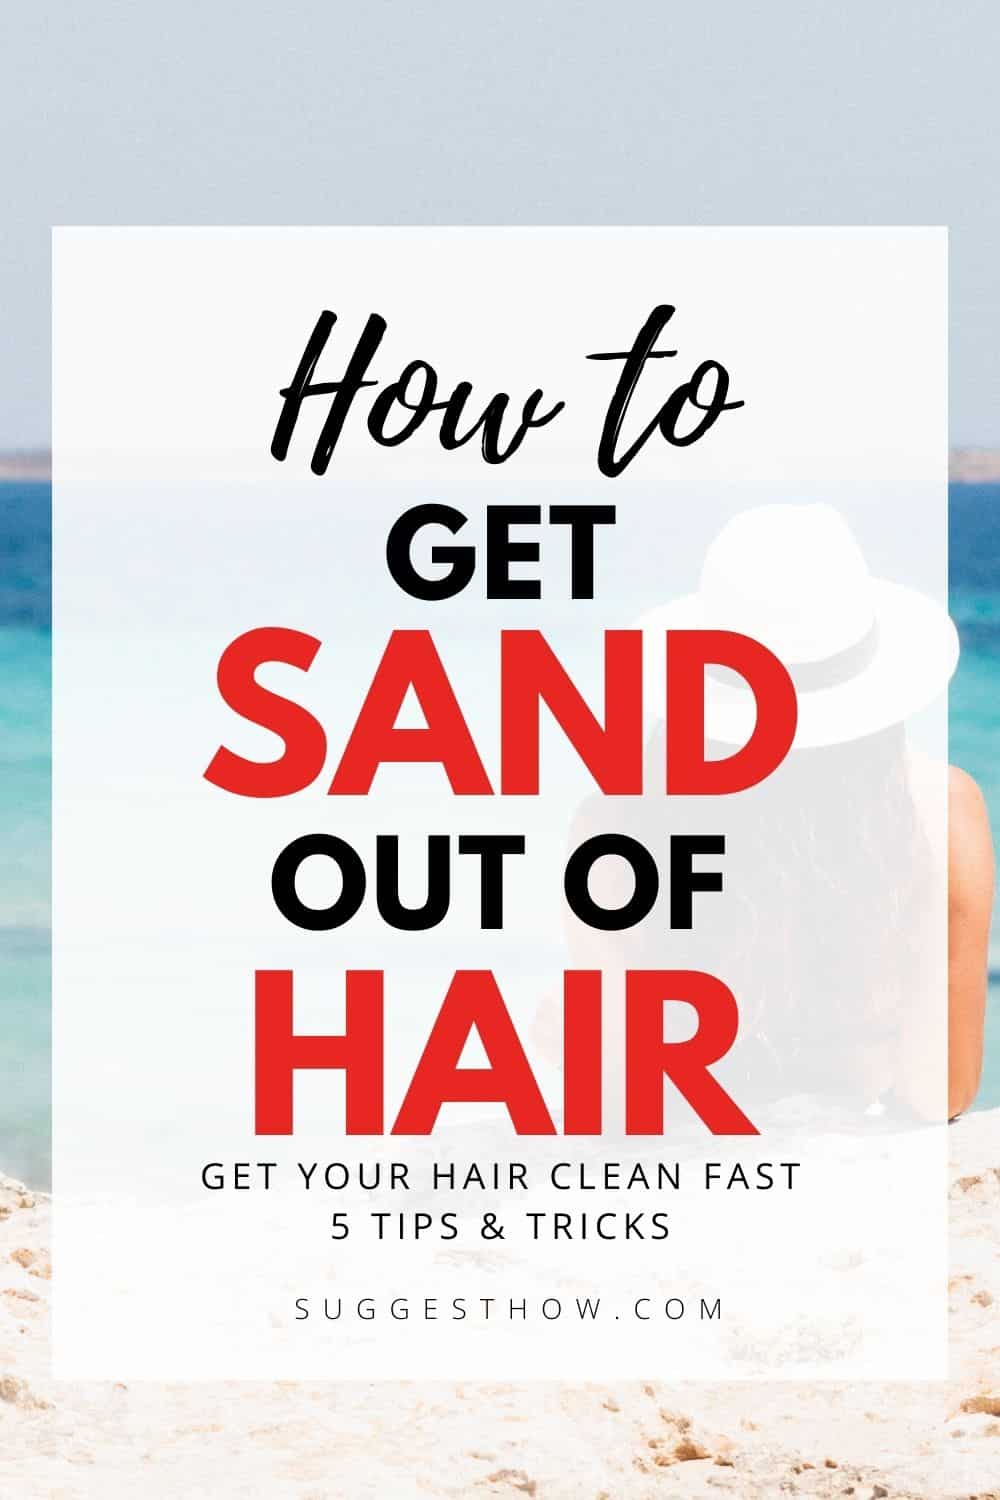 How to Get Sand Out of Hair - 5 Simple Tips and Tricks